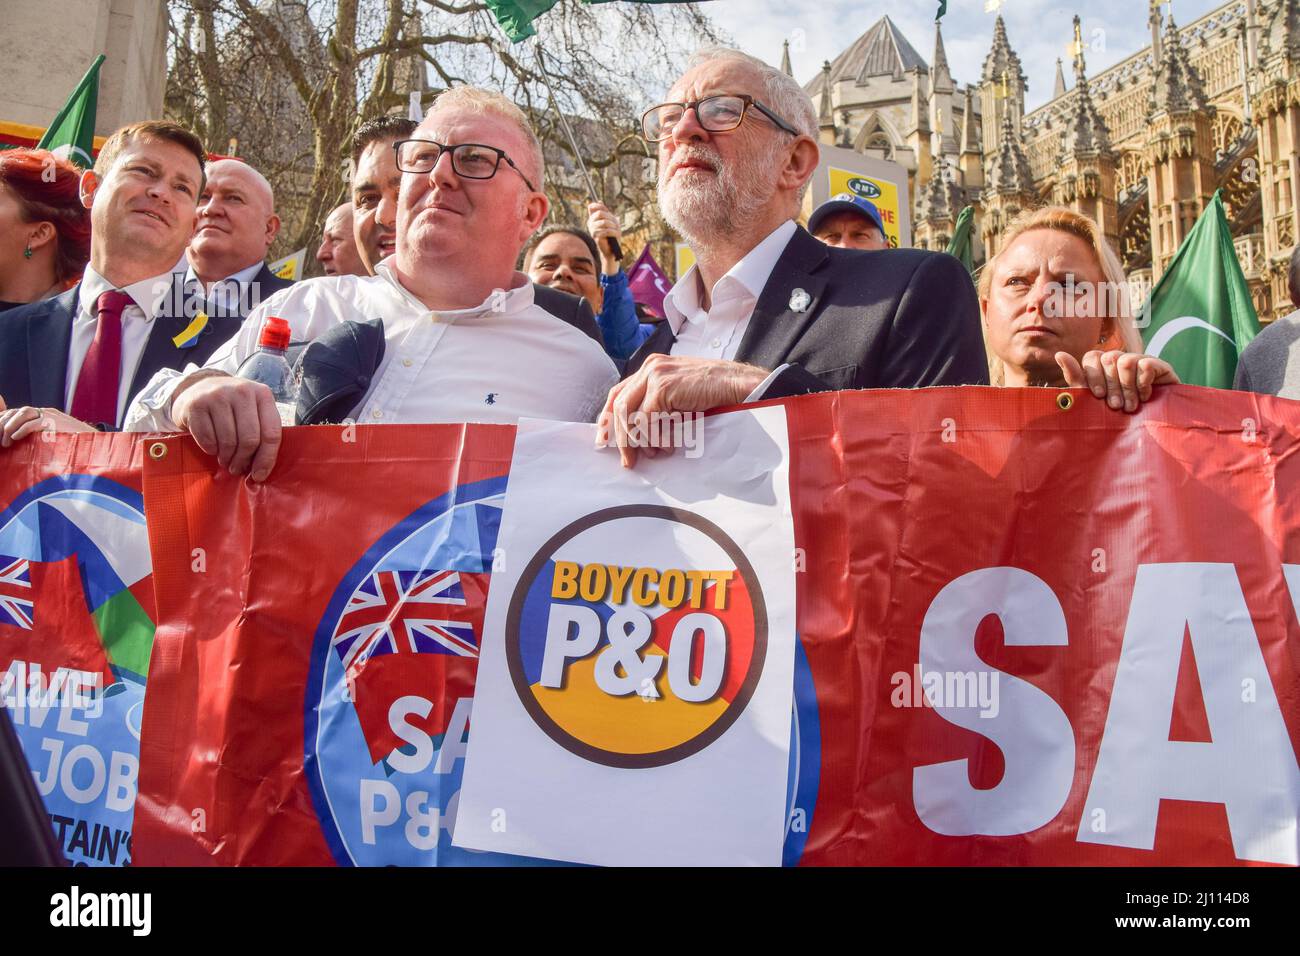 London, UK. 21st March 2022. Labour MP Jeremy Corbyn joins the protesters outside Parliament. P&O Ferries staff and RMT Union members marched from the headquarters of DP World, the company which owns P&O, to Parliament, after 800 UK staff were fired and replaced by agency workers. Credit: Vuk Valcic/Alamy Live News Stock Photo